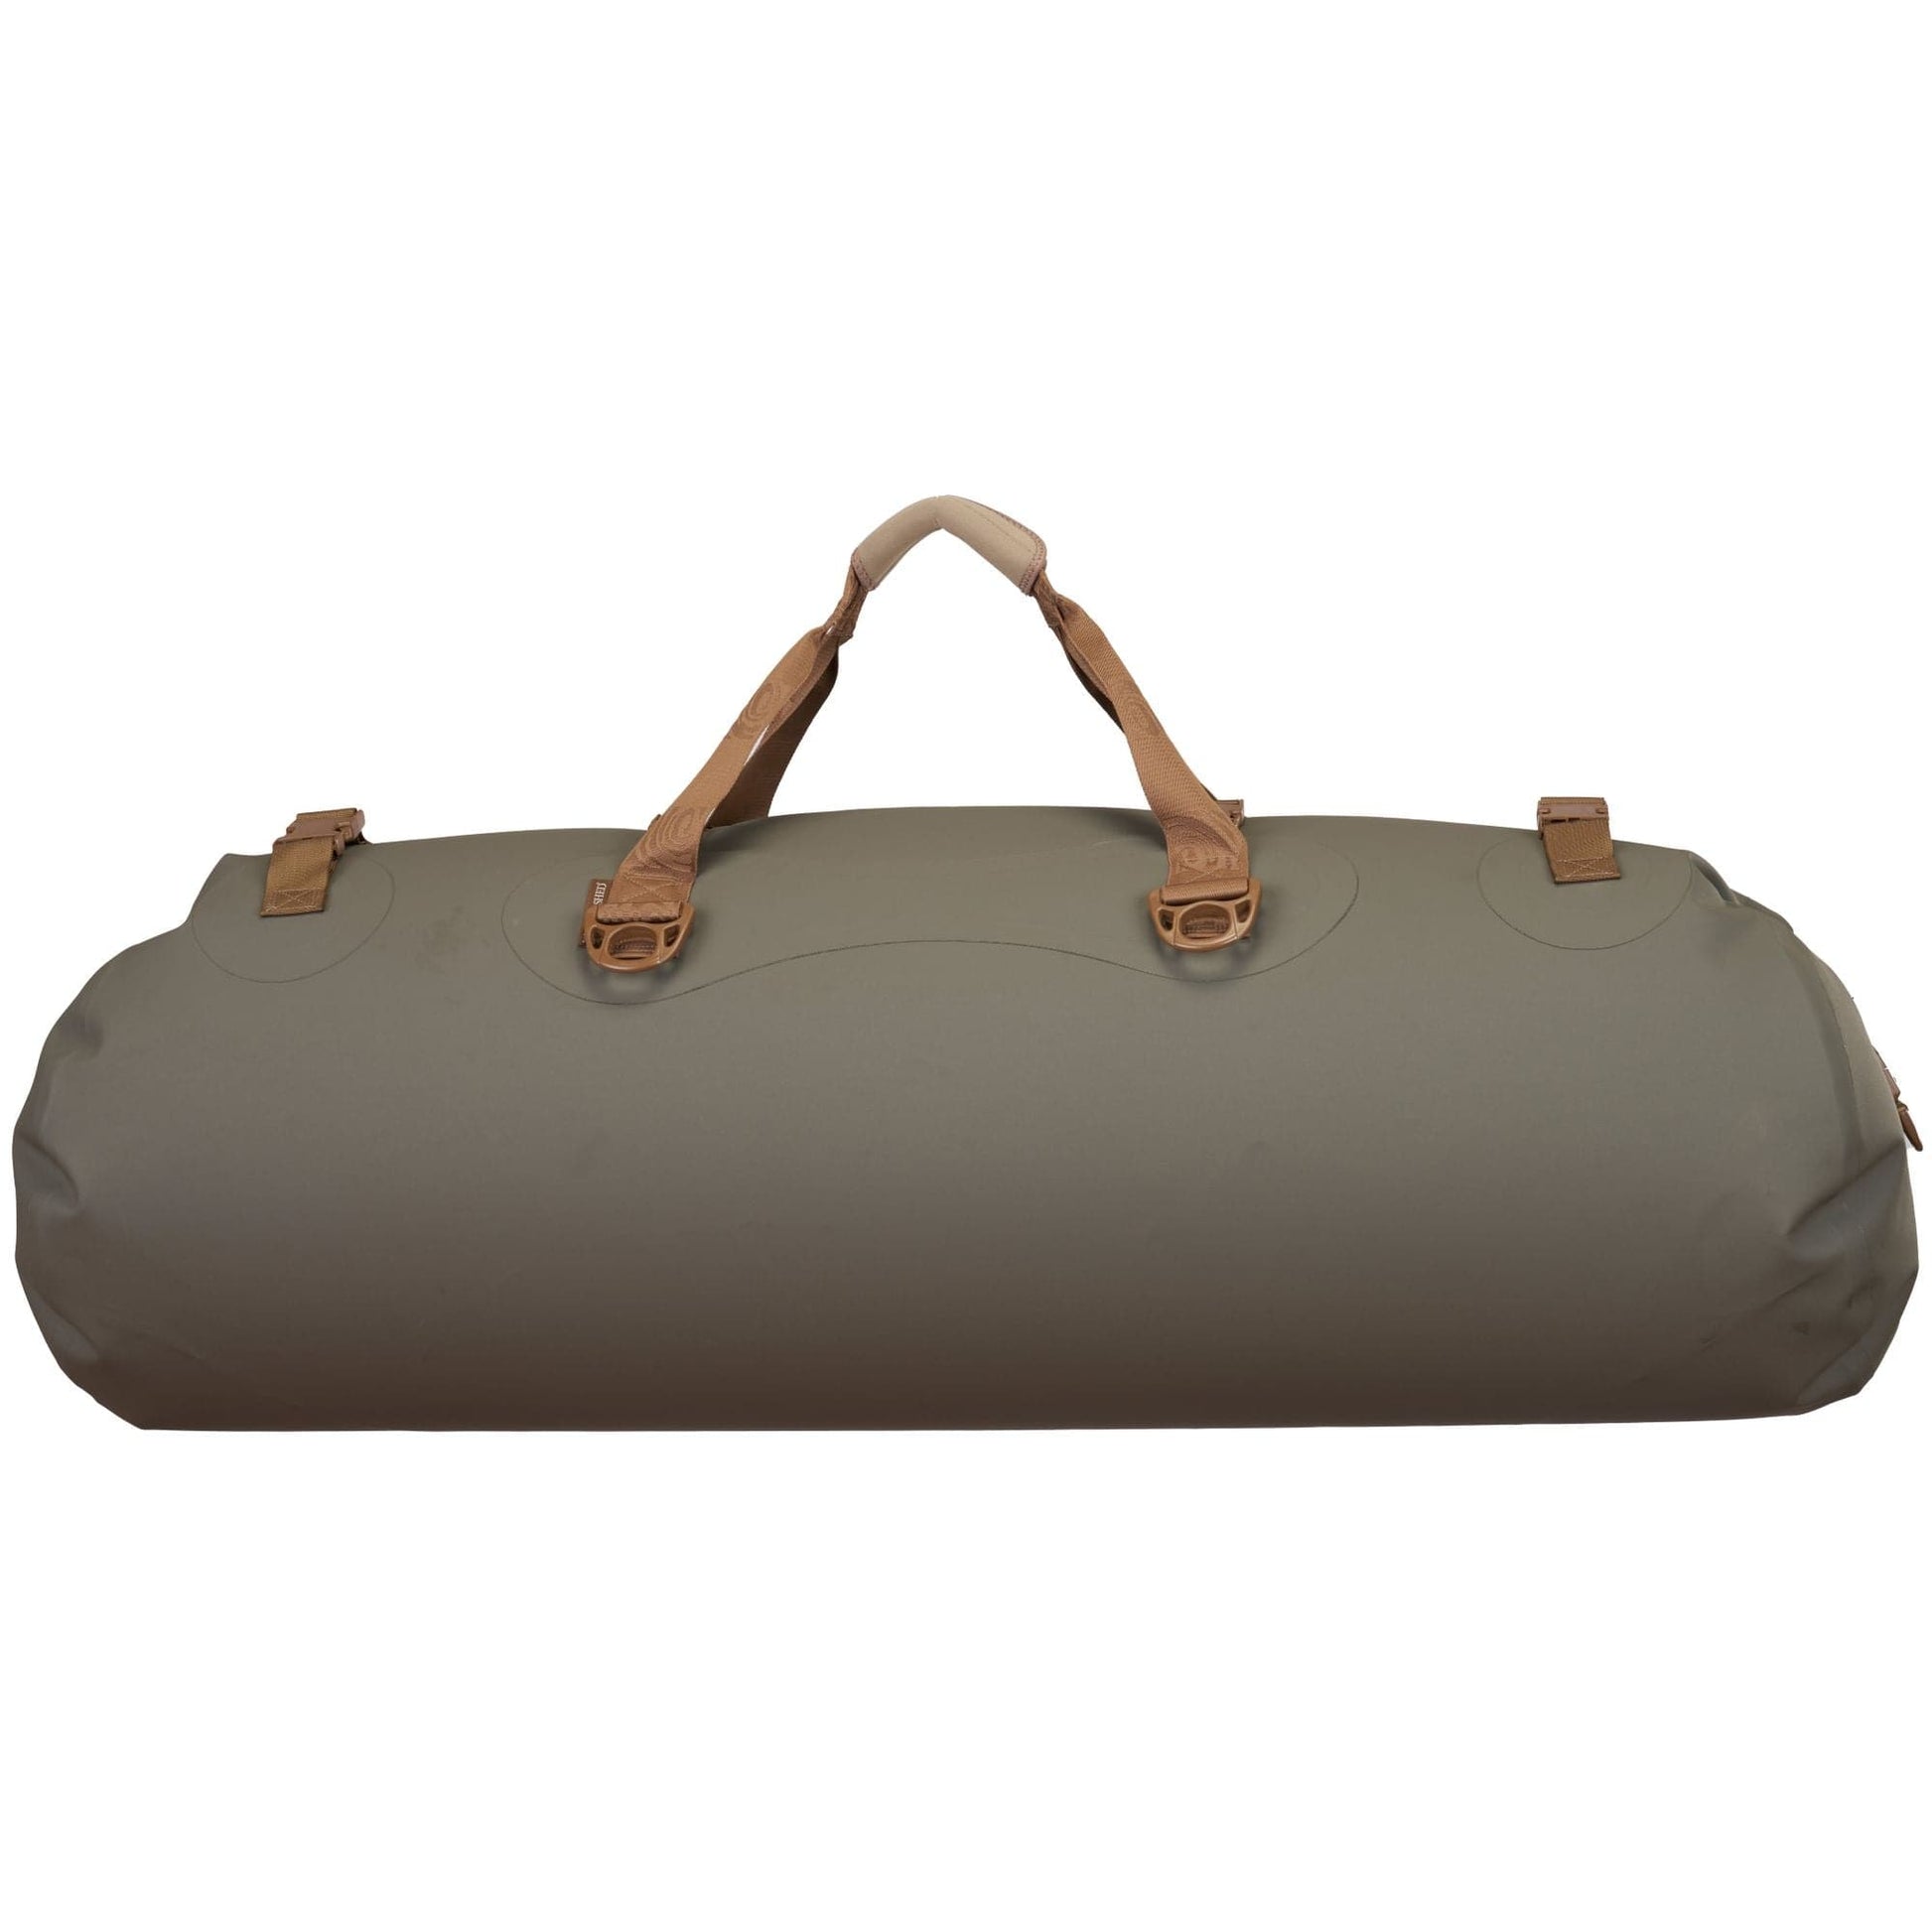 Featuring the Mississippi Duffel dry bag manufactured by Watershed shown here from a fifth angle.